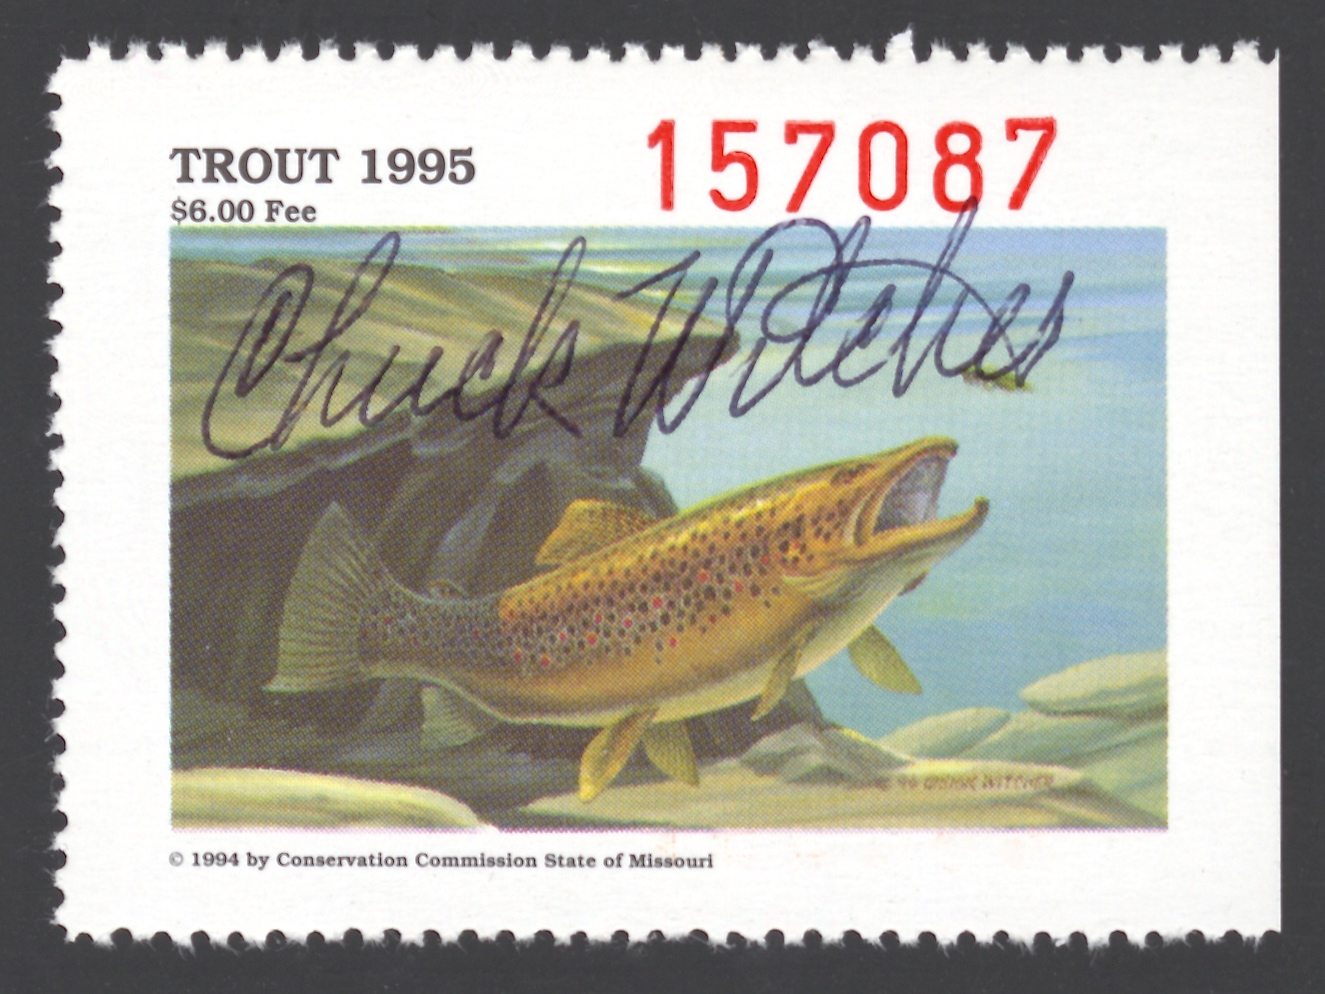 1995 Missouri Missouri Trout Stamp signed by Chuck Witcher